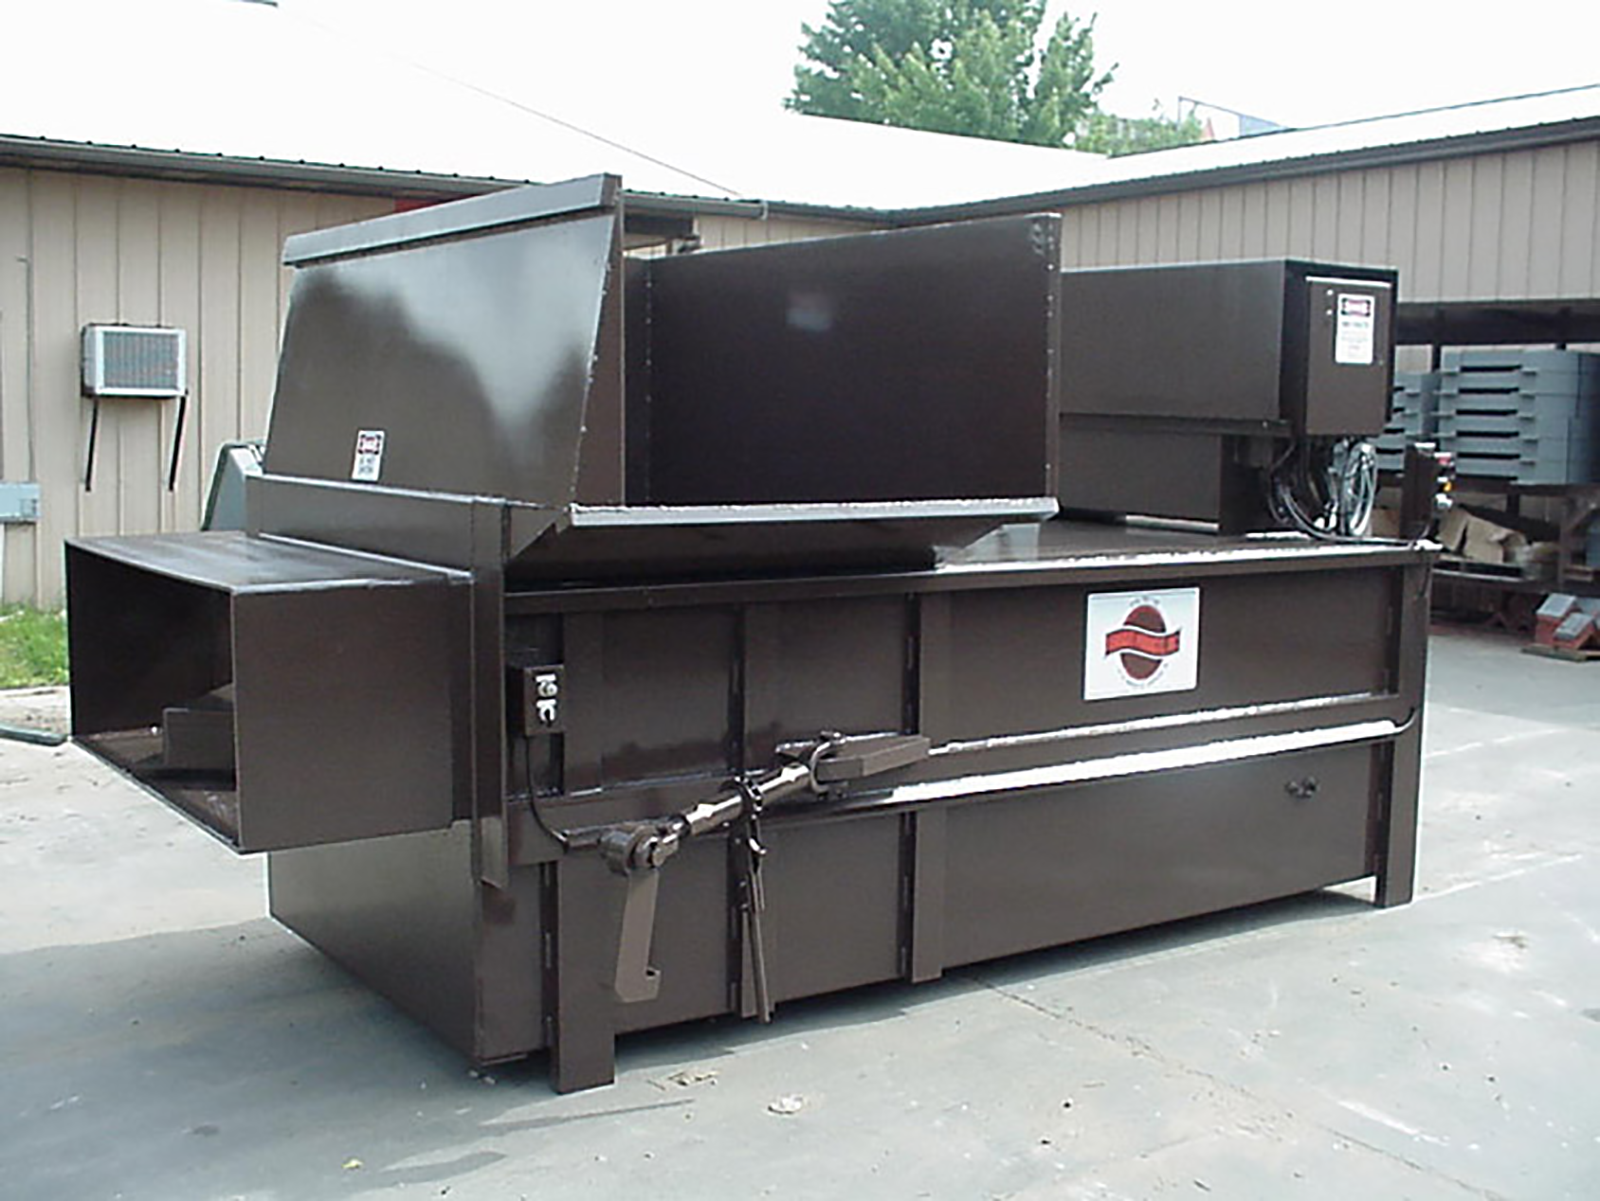 stationary self-contained compactor model ssc4660